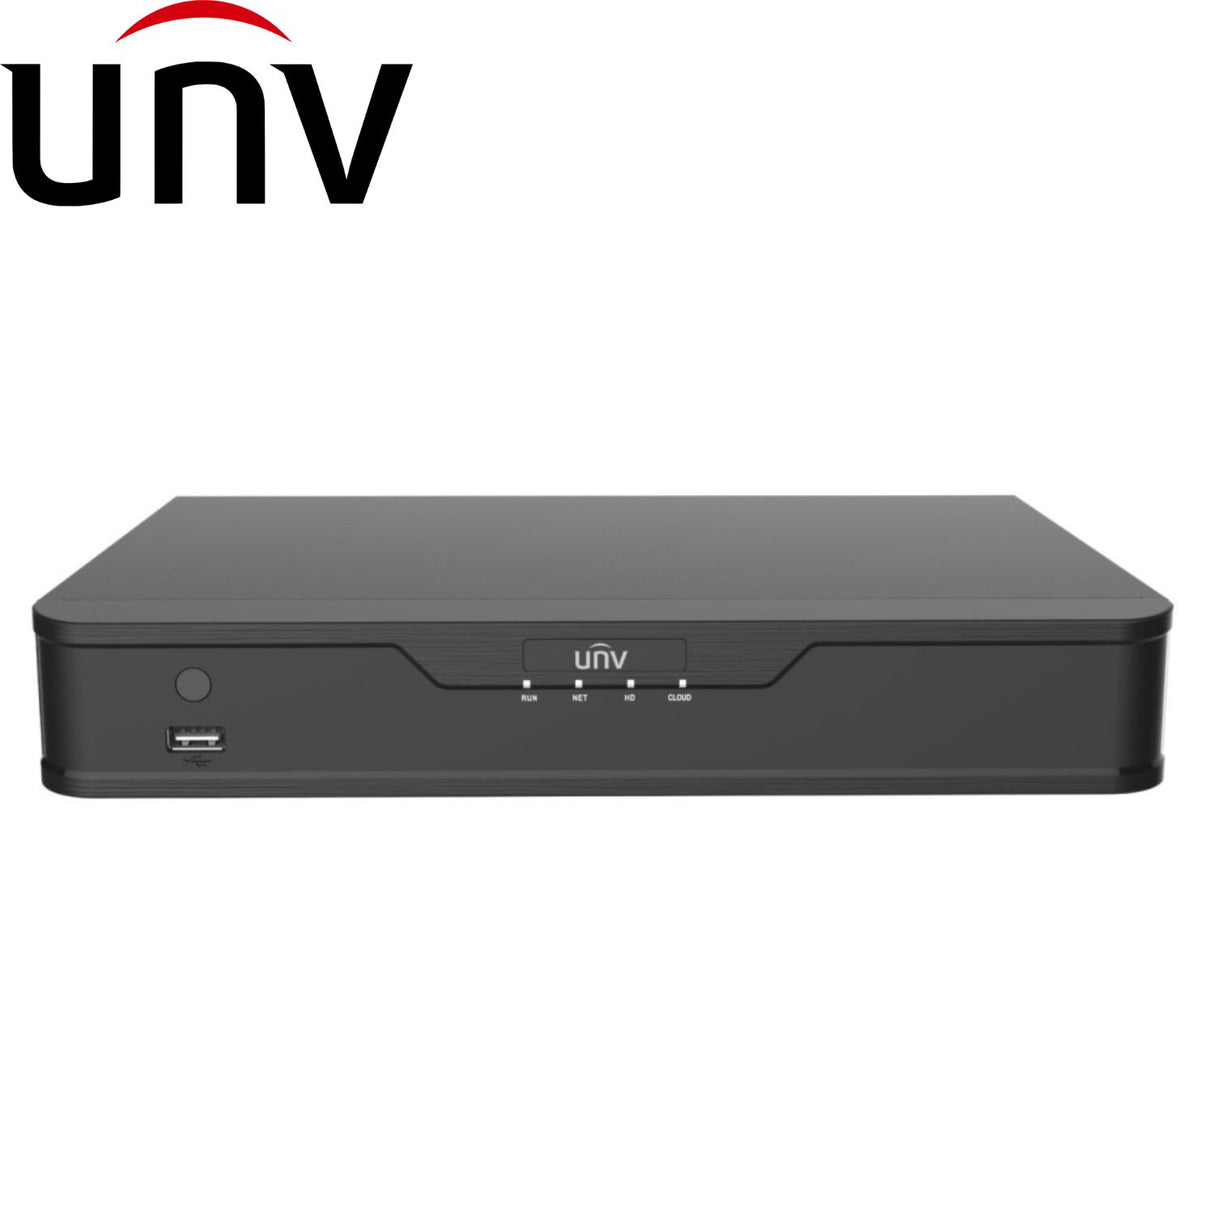 Uniview 4 Channel Network Video Recorder: 8MP (4K Ultra HD) - NVR301-04-P4